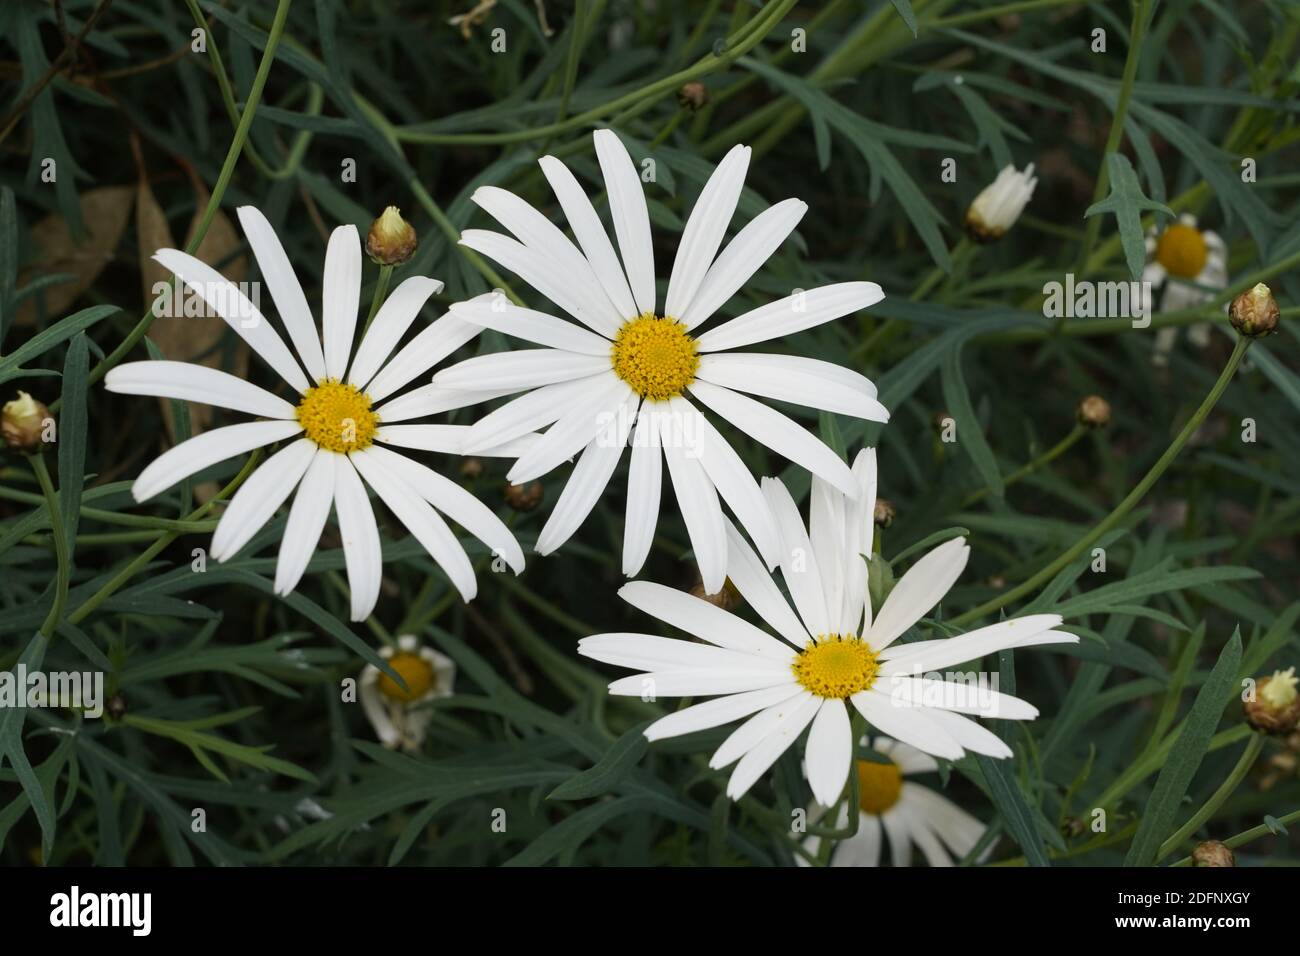 Peace and natural beauty of old fashioned Shasta daisy, perfection in the Australian garden. Stock Photo